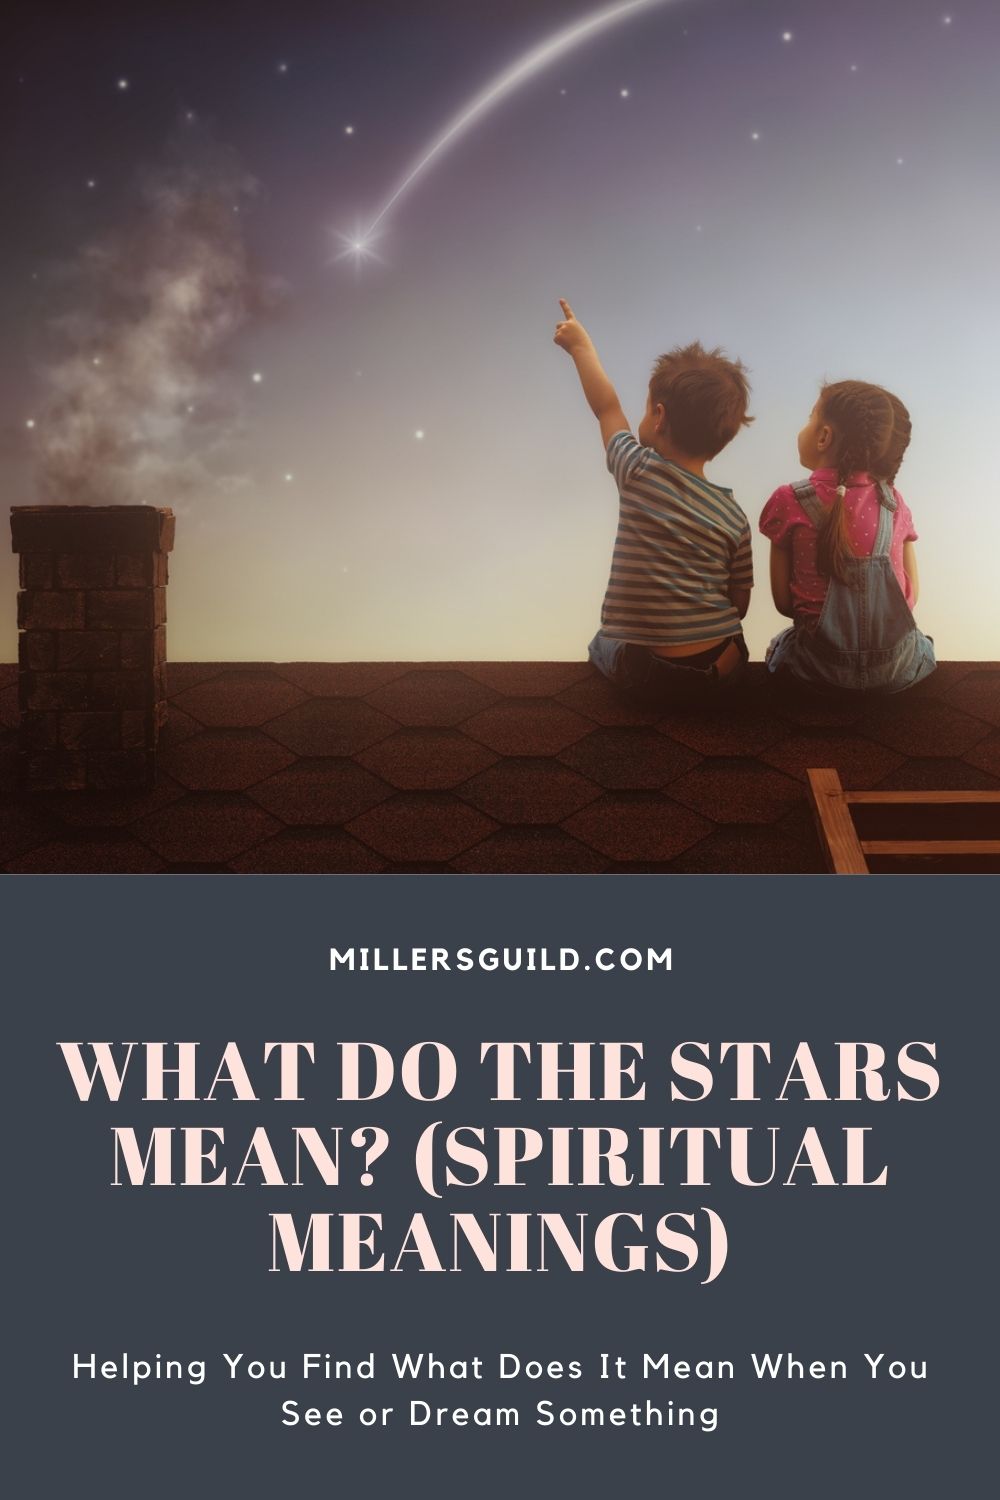 Spiritual Meaning Of A Shooting Star